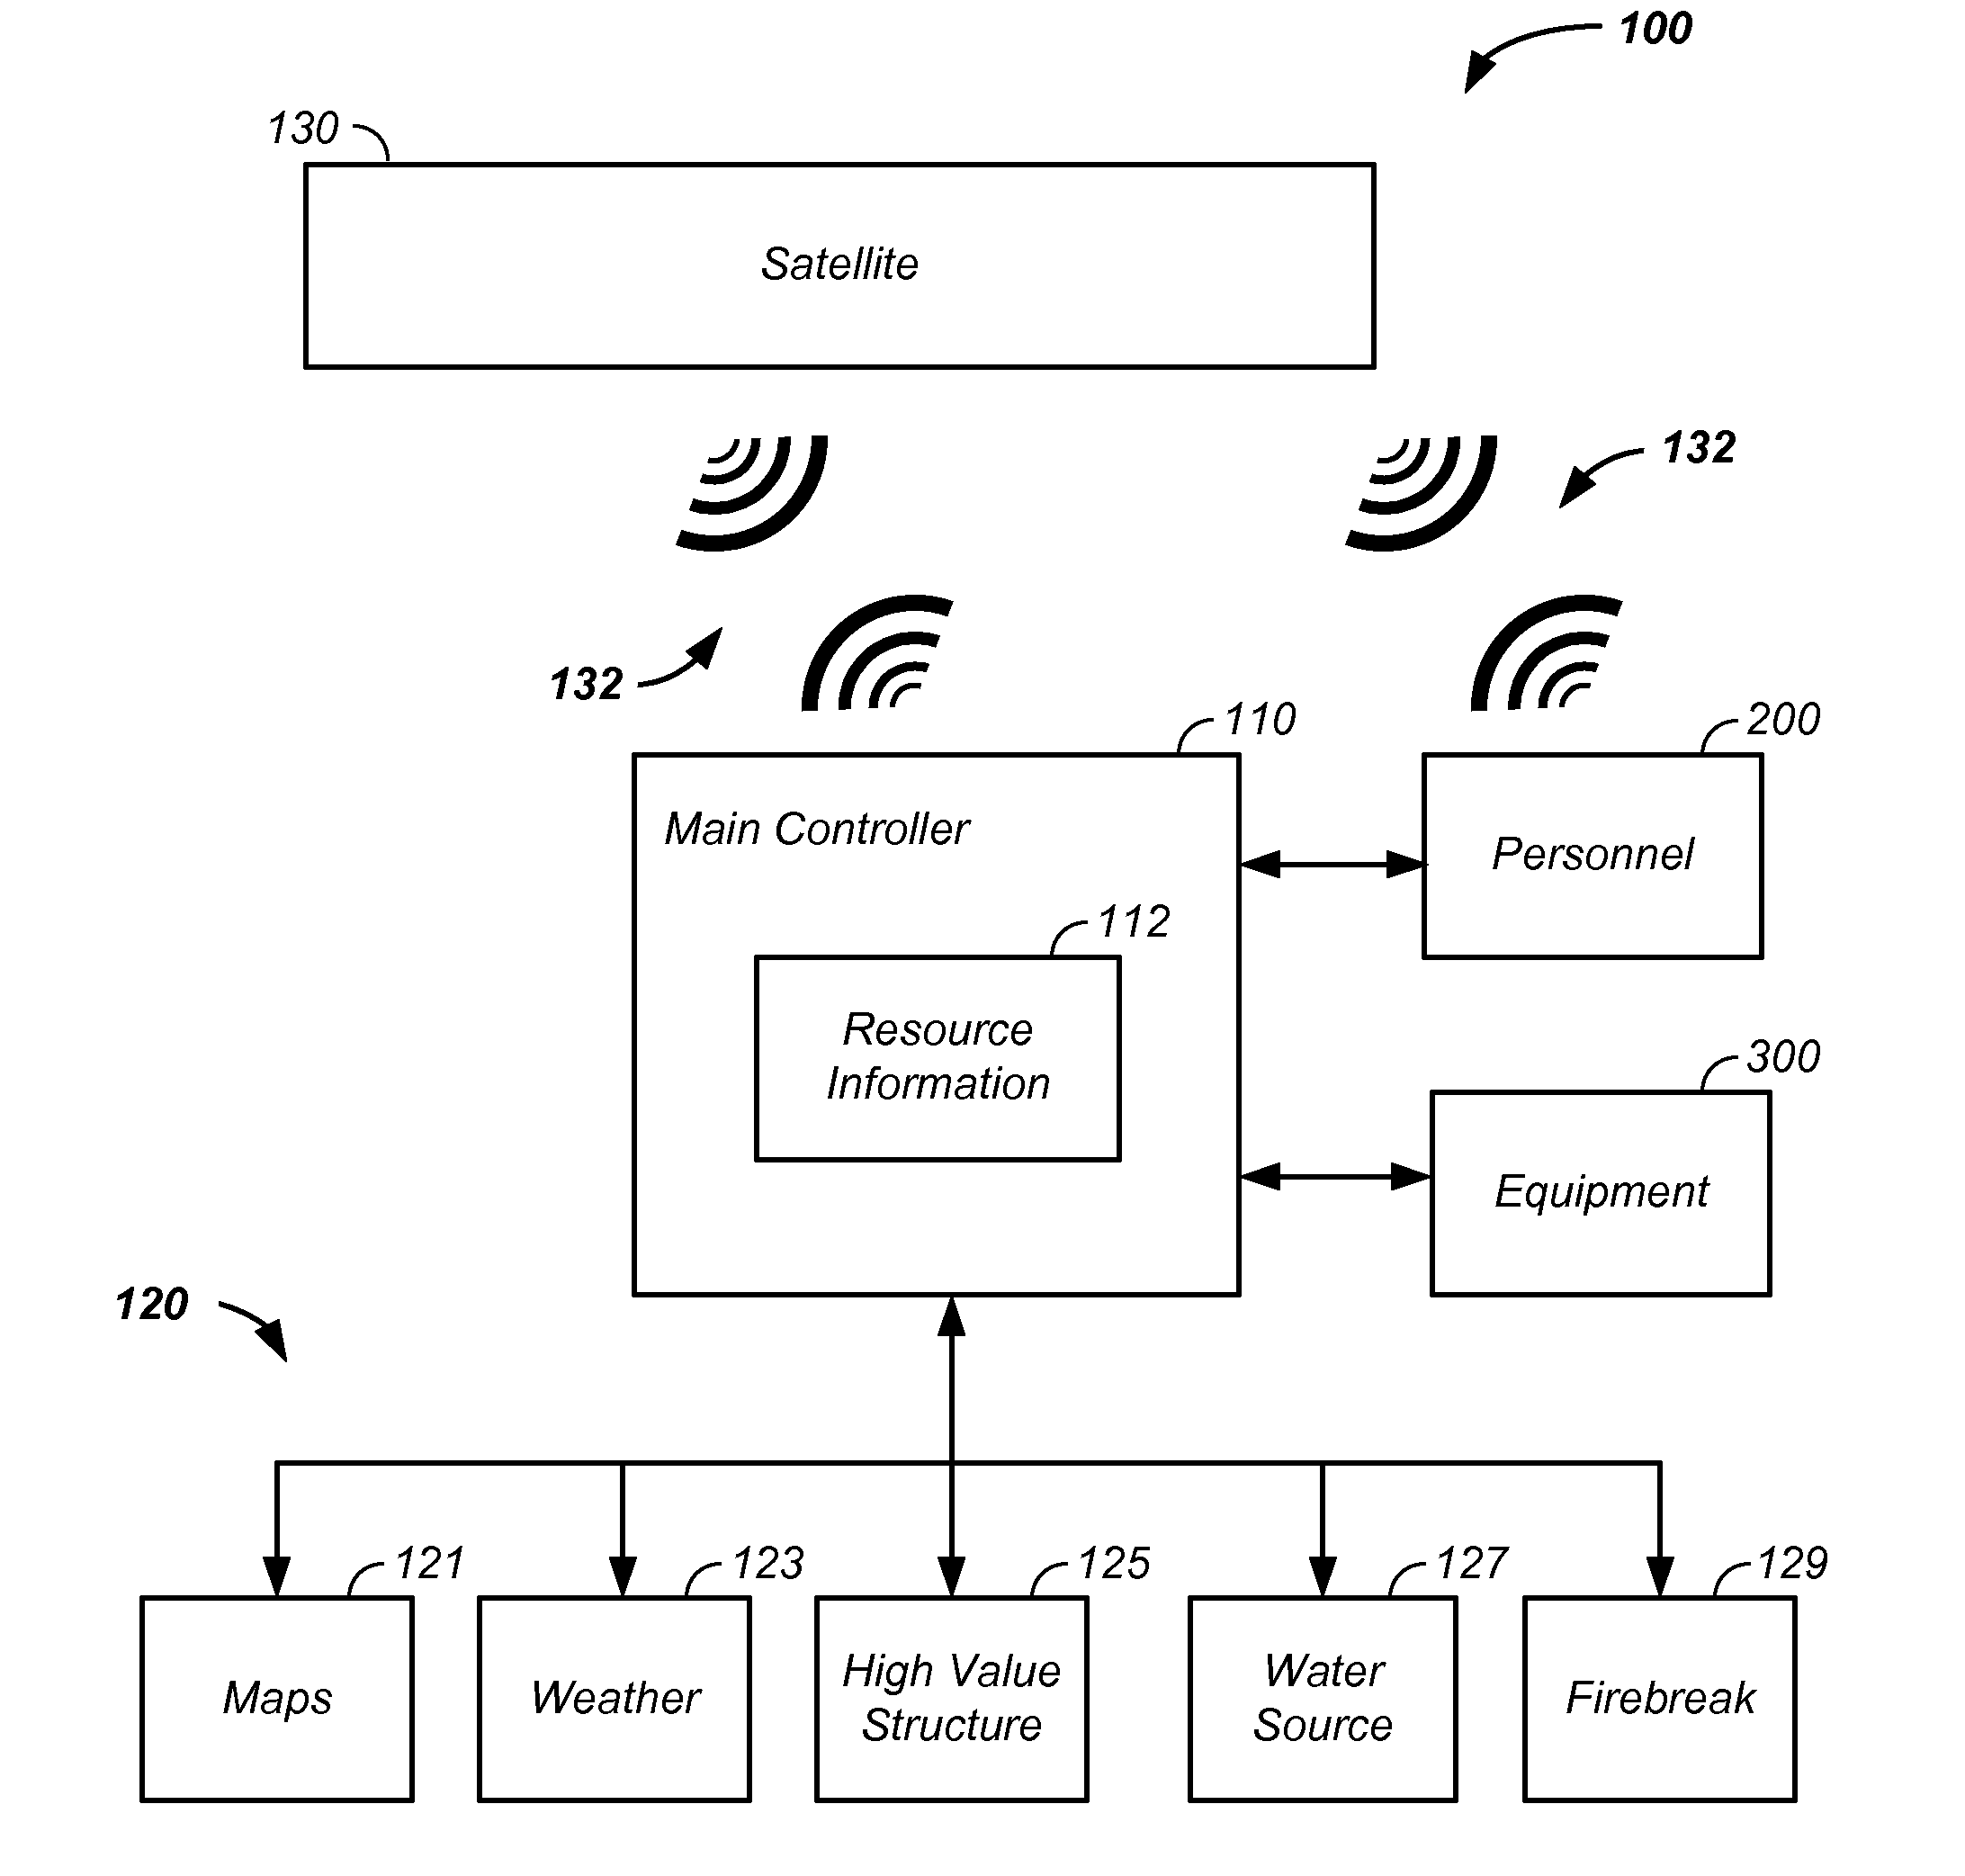 Wildfire resource tracking apparatus and method of use thereof